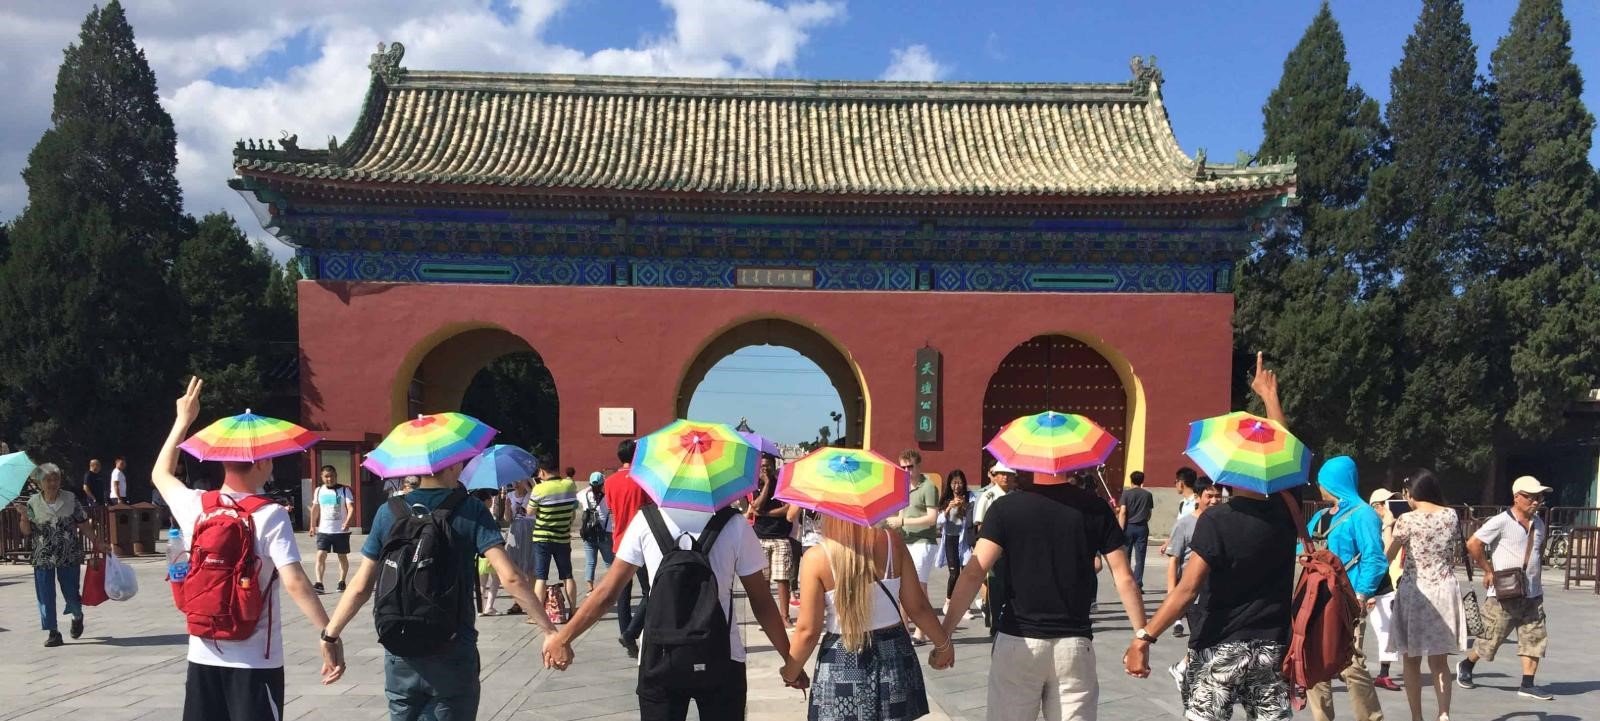 Students wearing rainbow umbrella hats at the entrance to a temple in China.